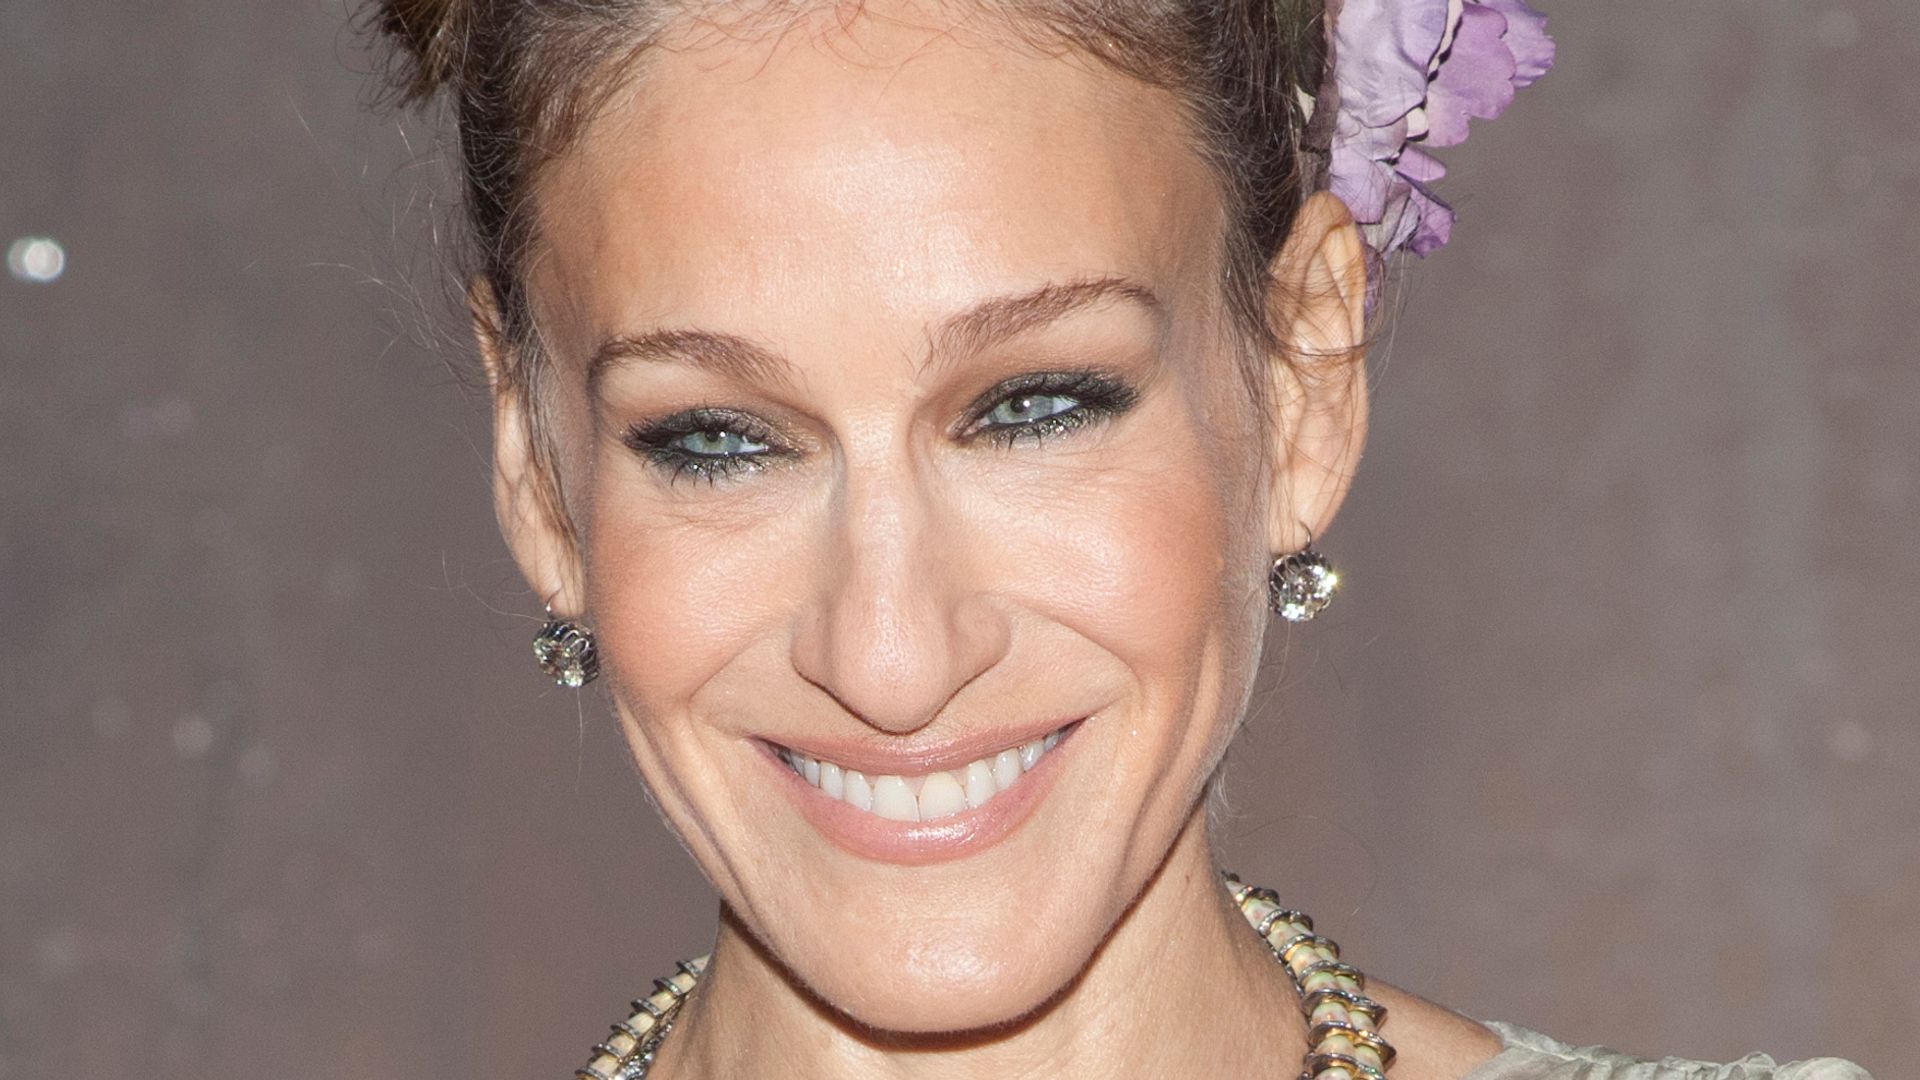 Sarah Jessica Parker attends the New York City Ballet Fall Gala Celebrating Legendary Fashion Designer Valentino at Lincoln Center in New York City.